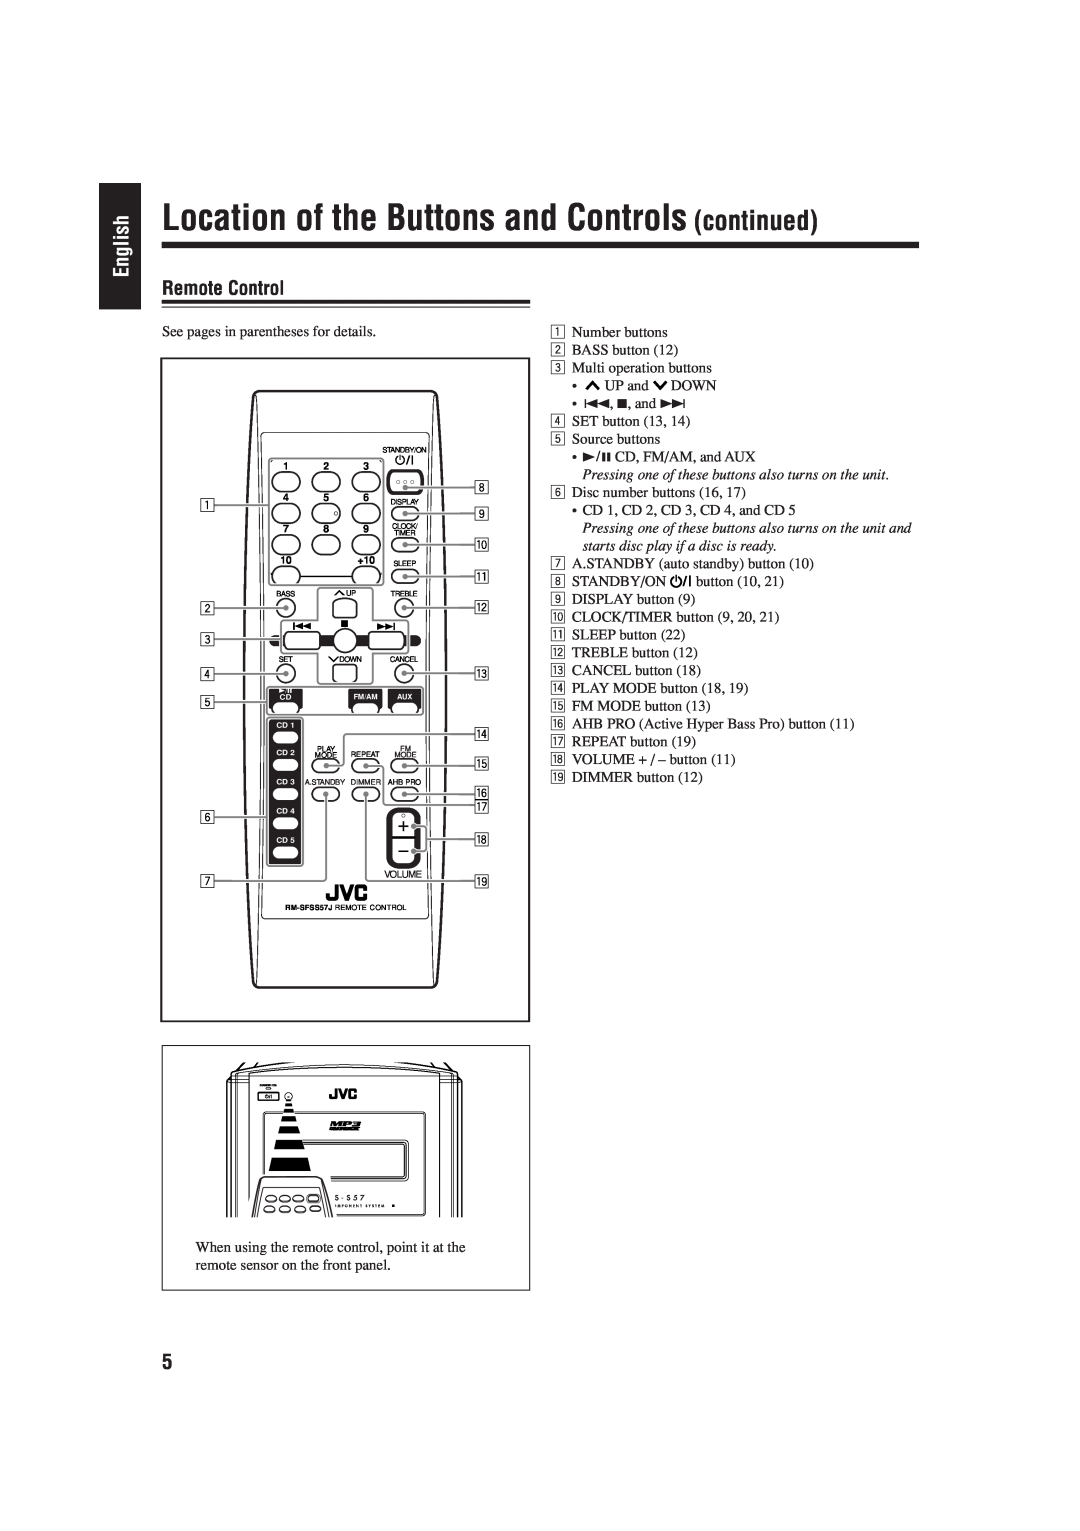 JVC GVT0134-001B, CA-FSS57 manual Location of the Buttons and Controls continued, English, Remote Control 